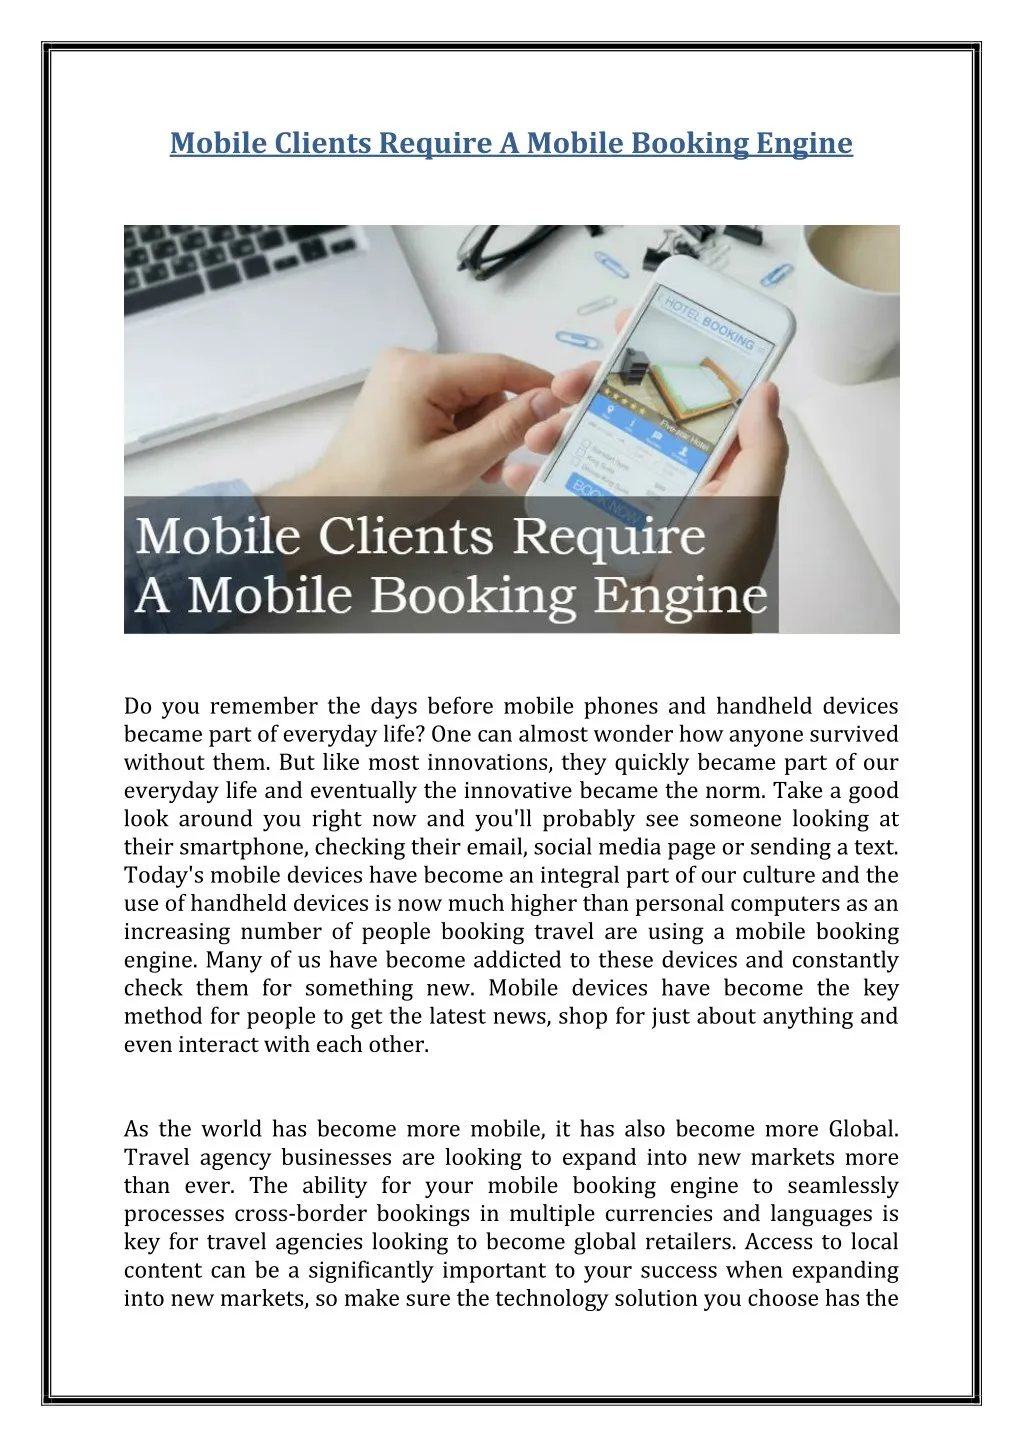 mobile clients require a mobile booking engine